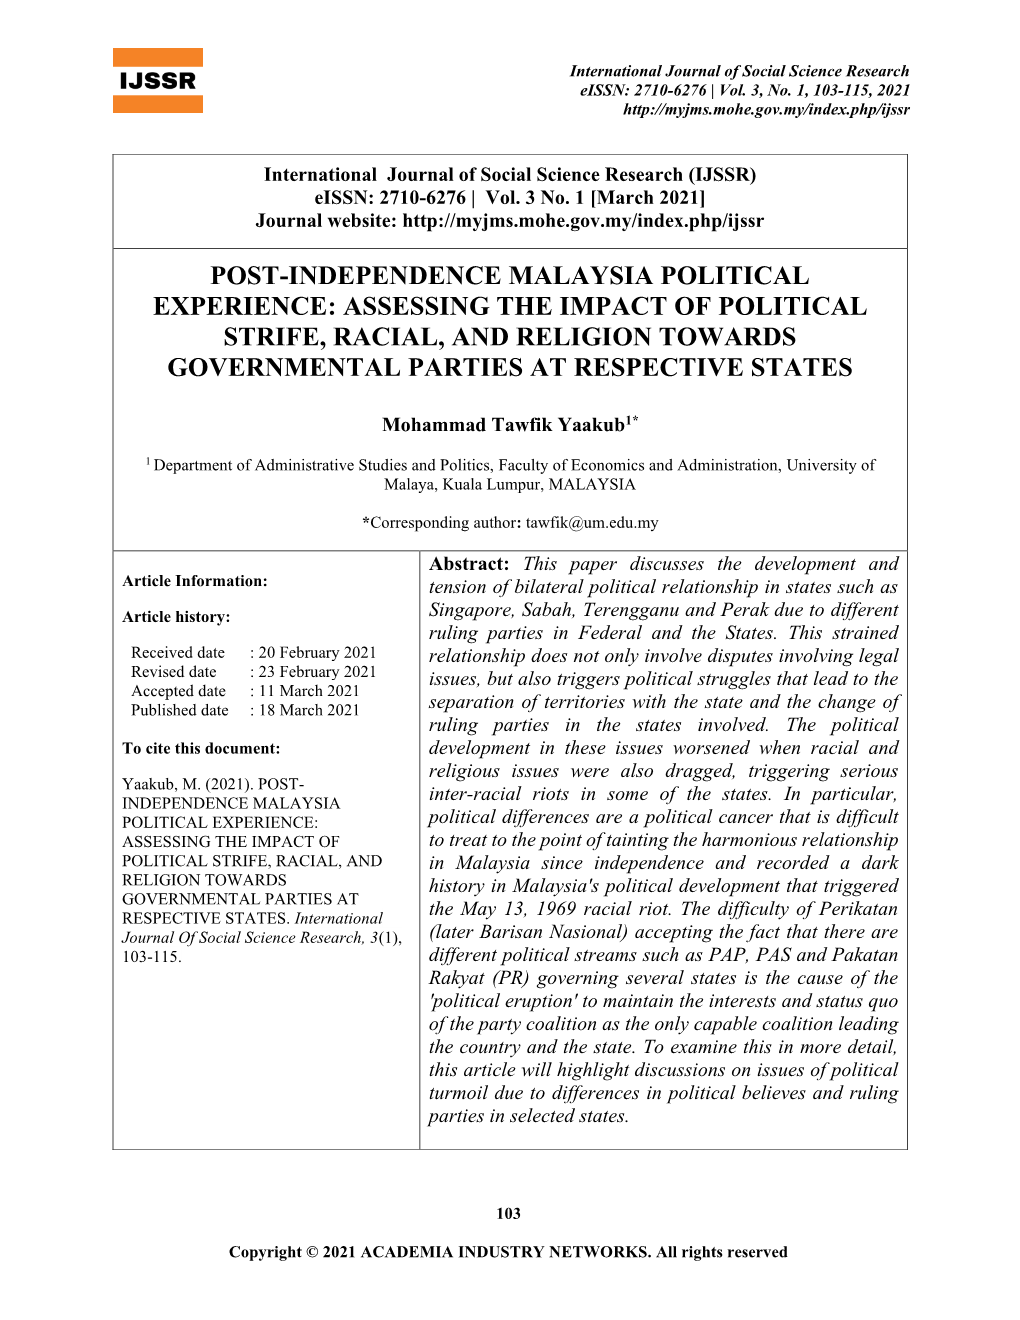 Post-Independence Malaysia Political Experience: Assessing the Impact of Political Strife, Racial, and Religion Towards Governmental Parties at Respective States